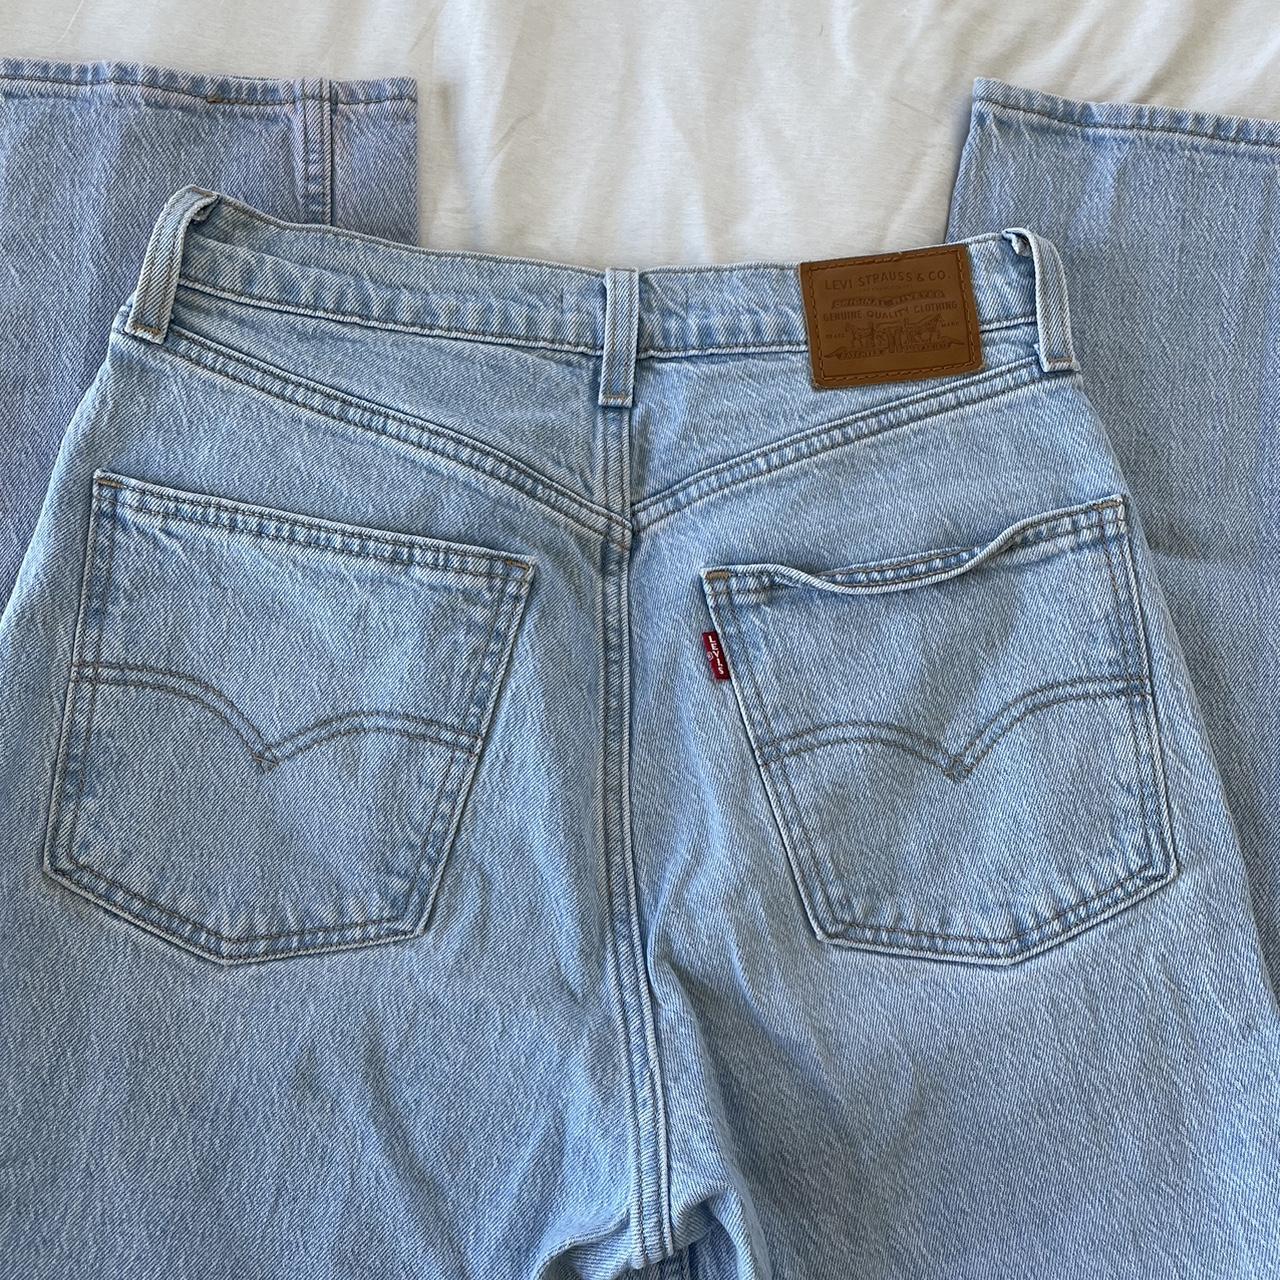 Women’s Levi’s Jeans Only worn once Size 28 High... - Depop